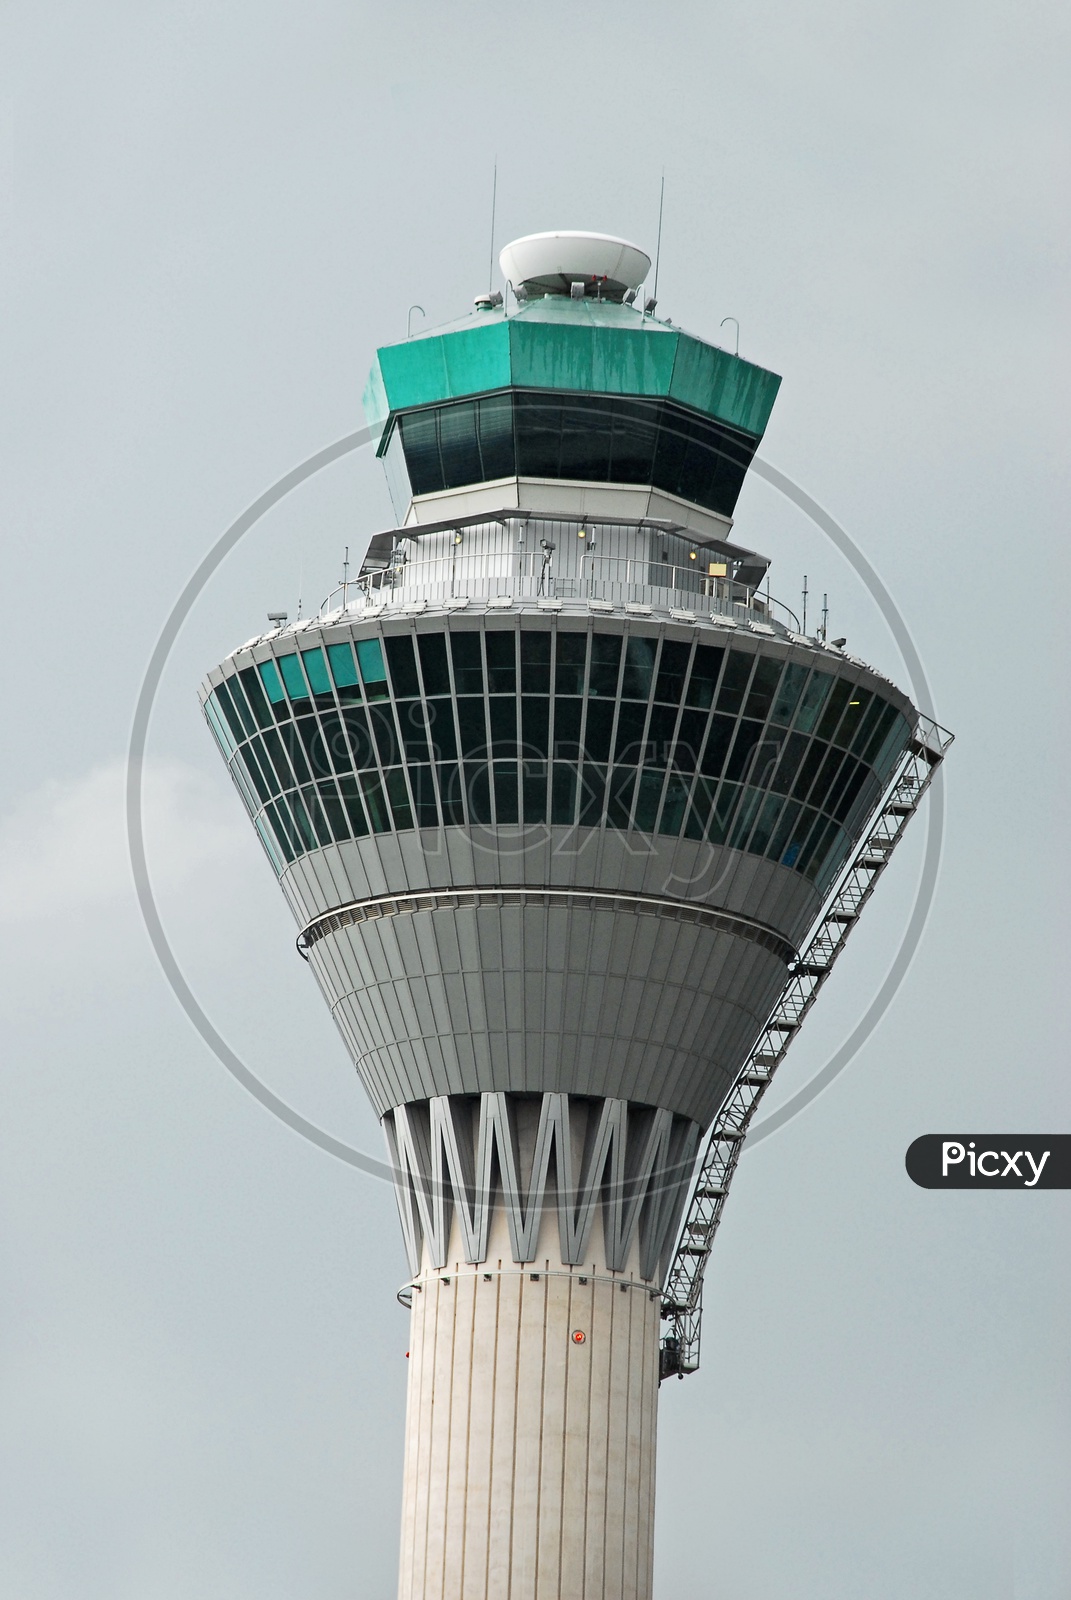 Air Traffic Control Tower ( ATC ) in Airport